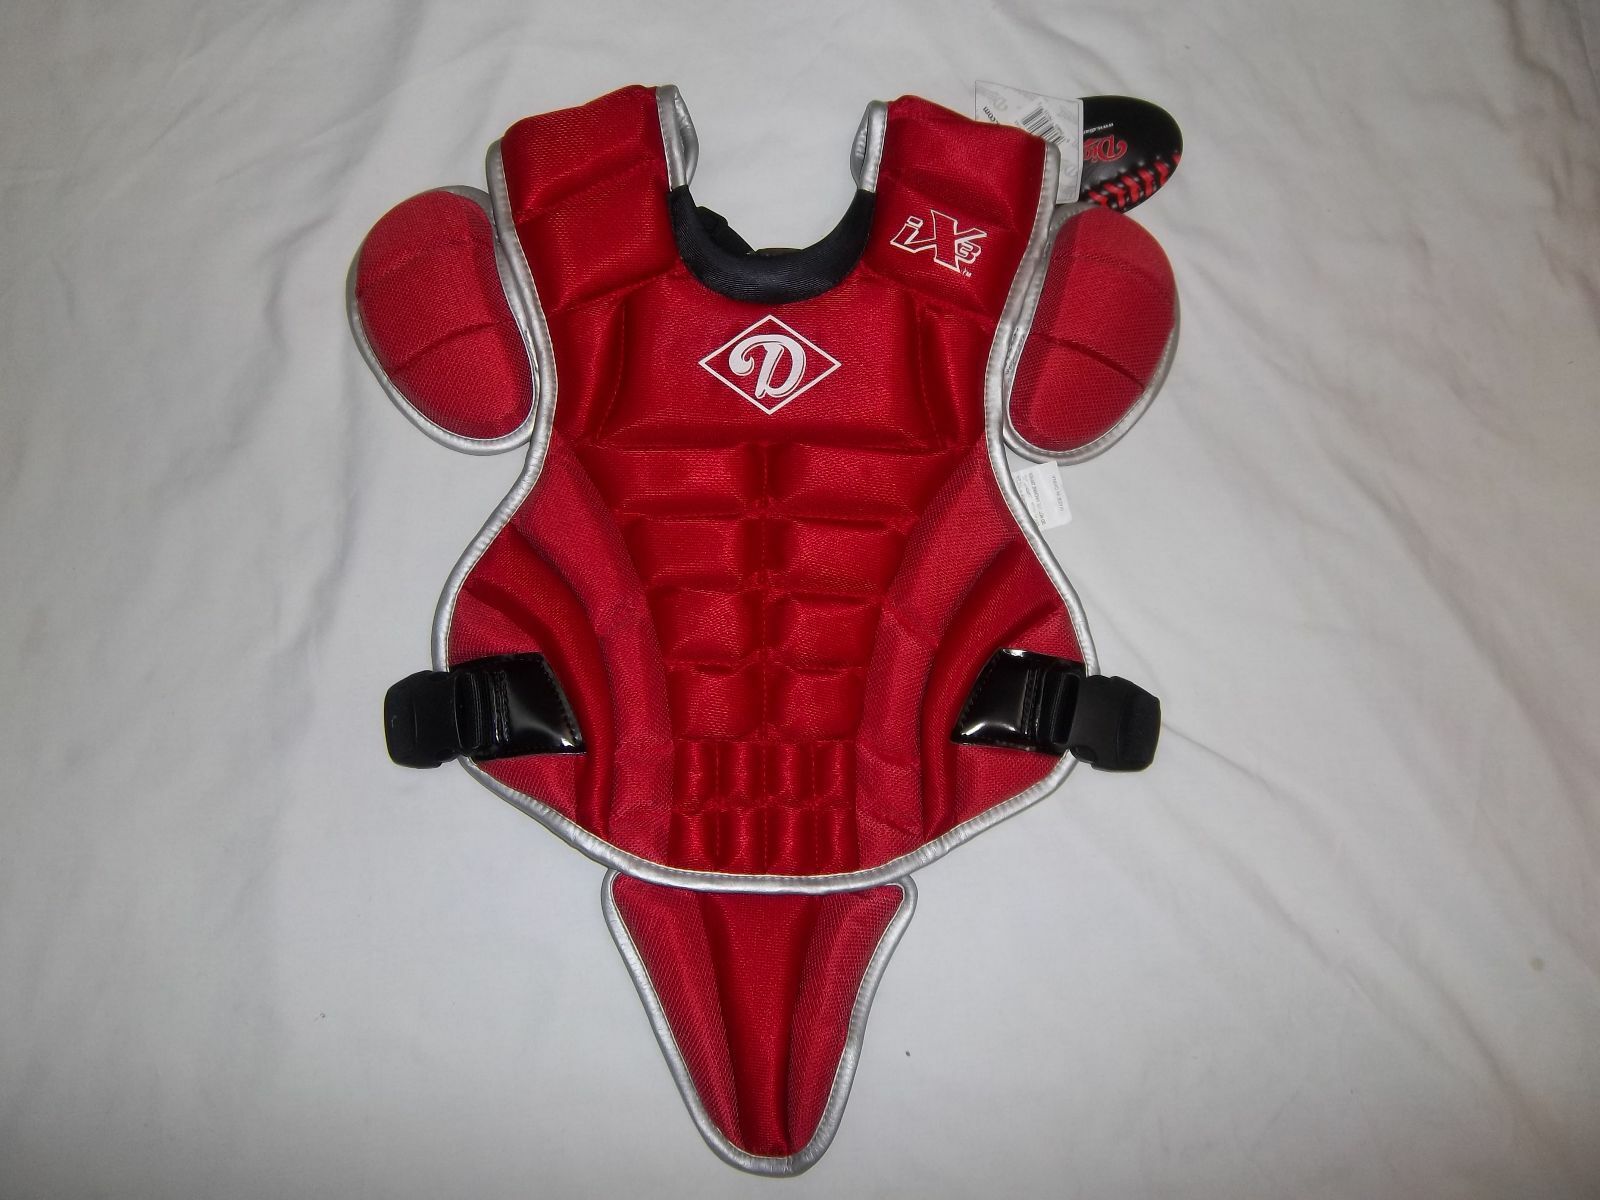 DIAMOND DCP-iX3 V3 BASEBALL YOUTH CHEST PROTECTOR - RED